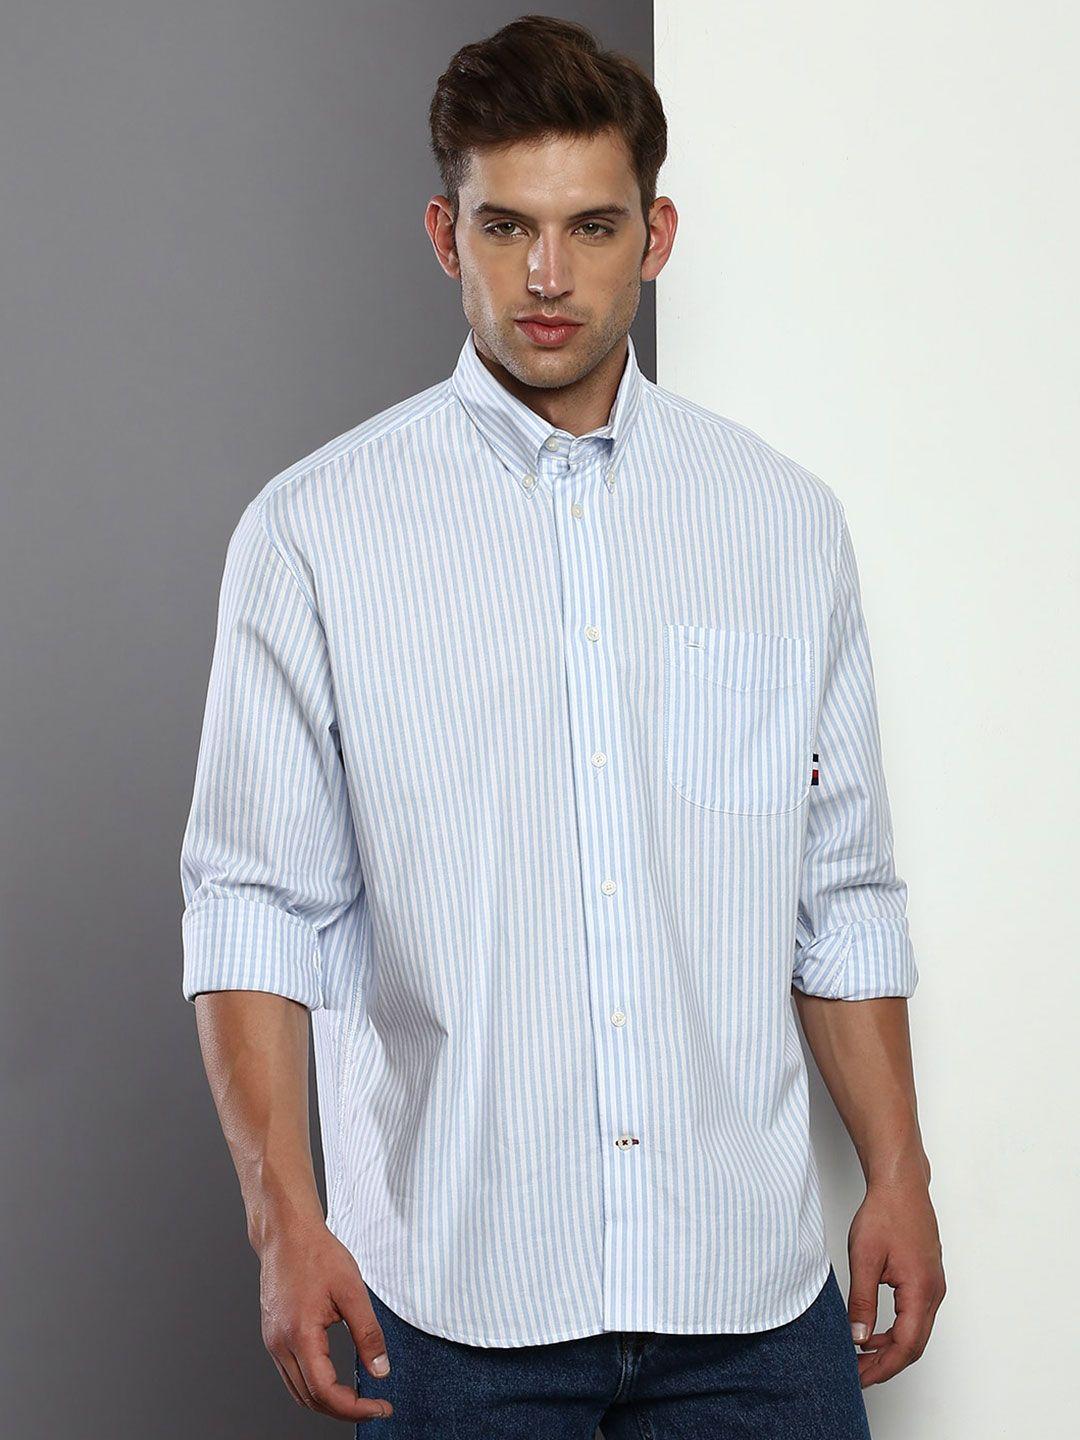 tommy-hilfiger-boxy-fit-striped-button-down-collar-casual-shirt